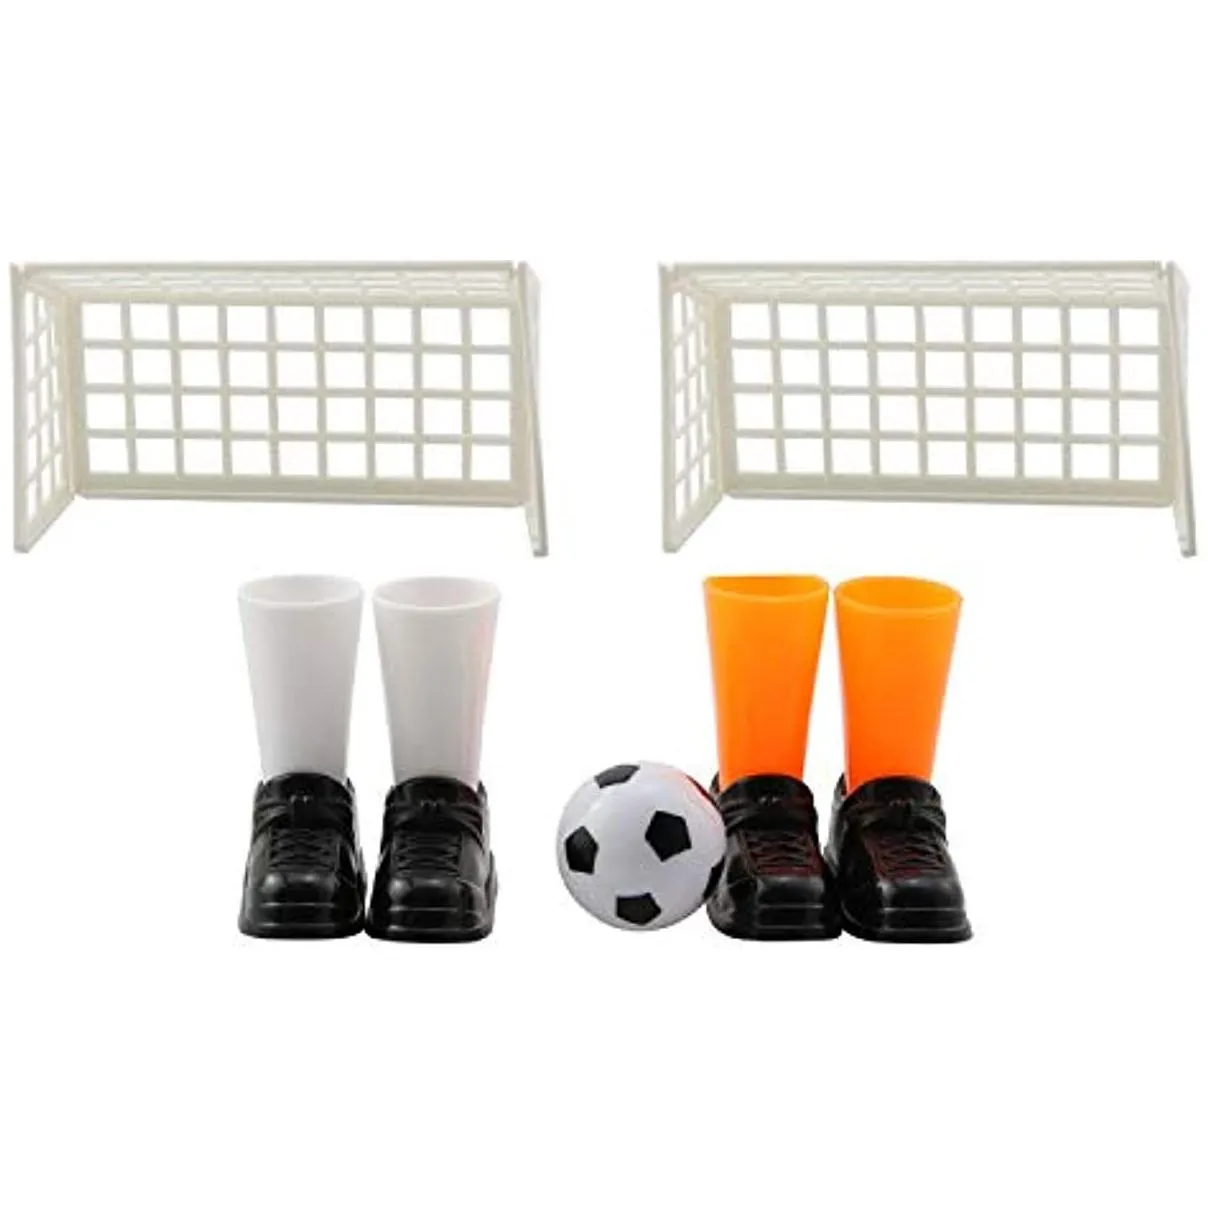 Finger Toys Finger Soccer Toys Footballs Match Board Game Funny Table Games Set With Two Goals Toy Drop Delivery Toys Gifts Novelty Ga Dh9Iy